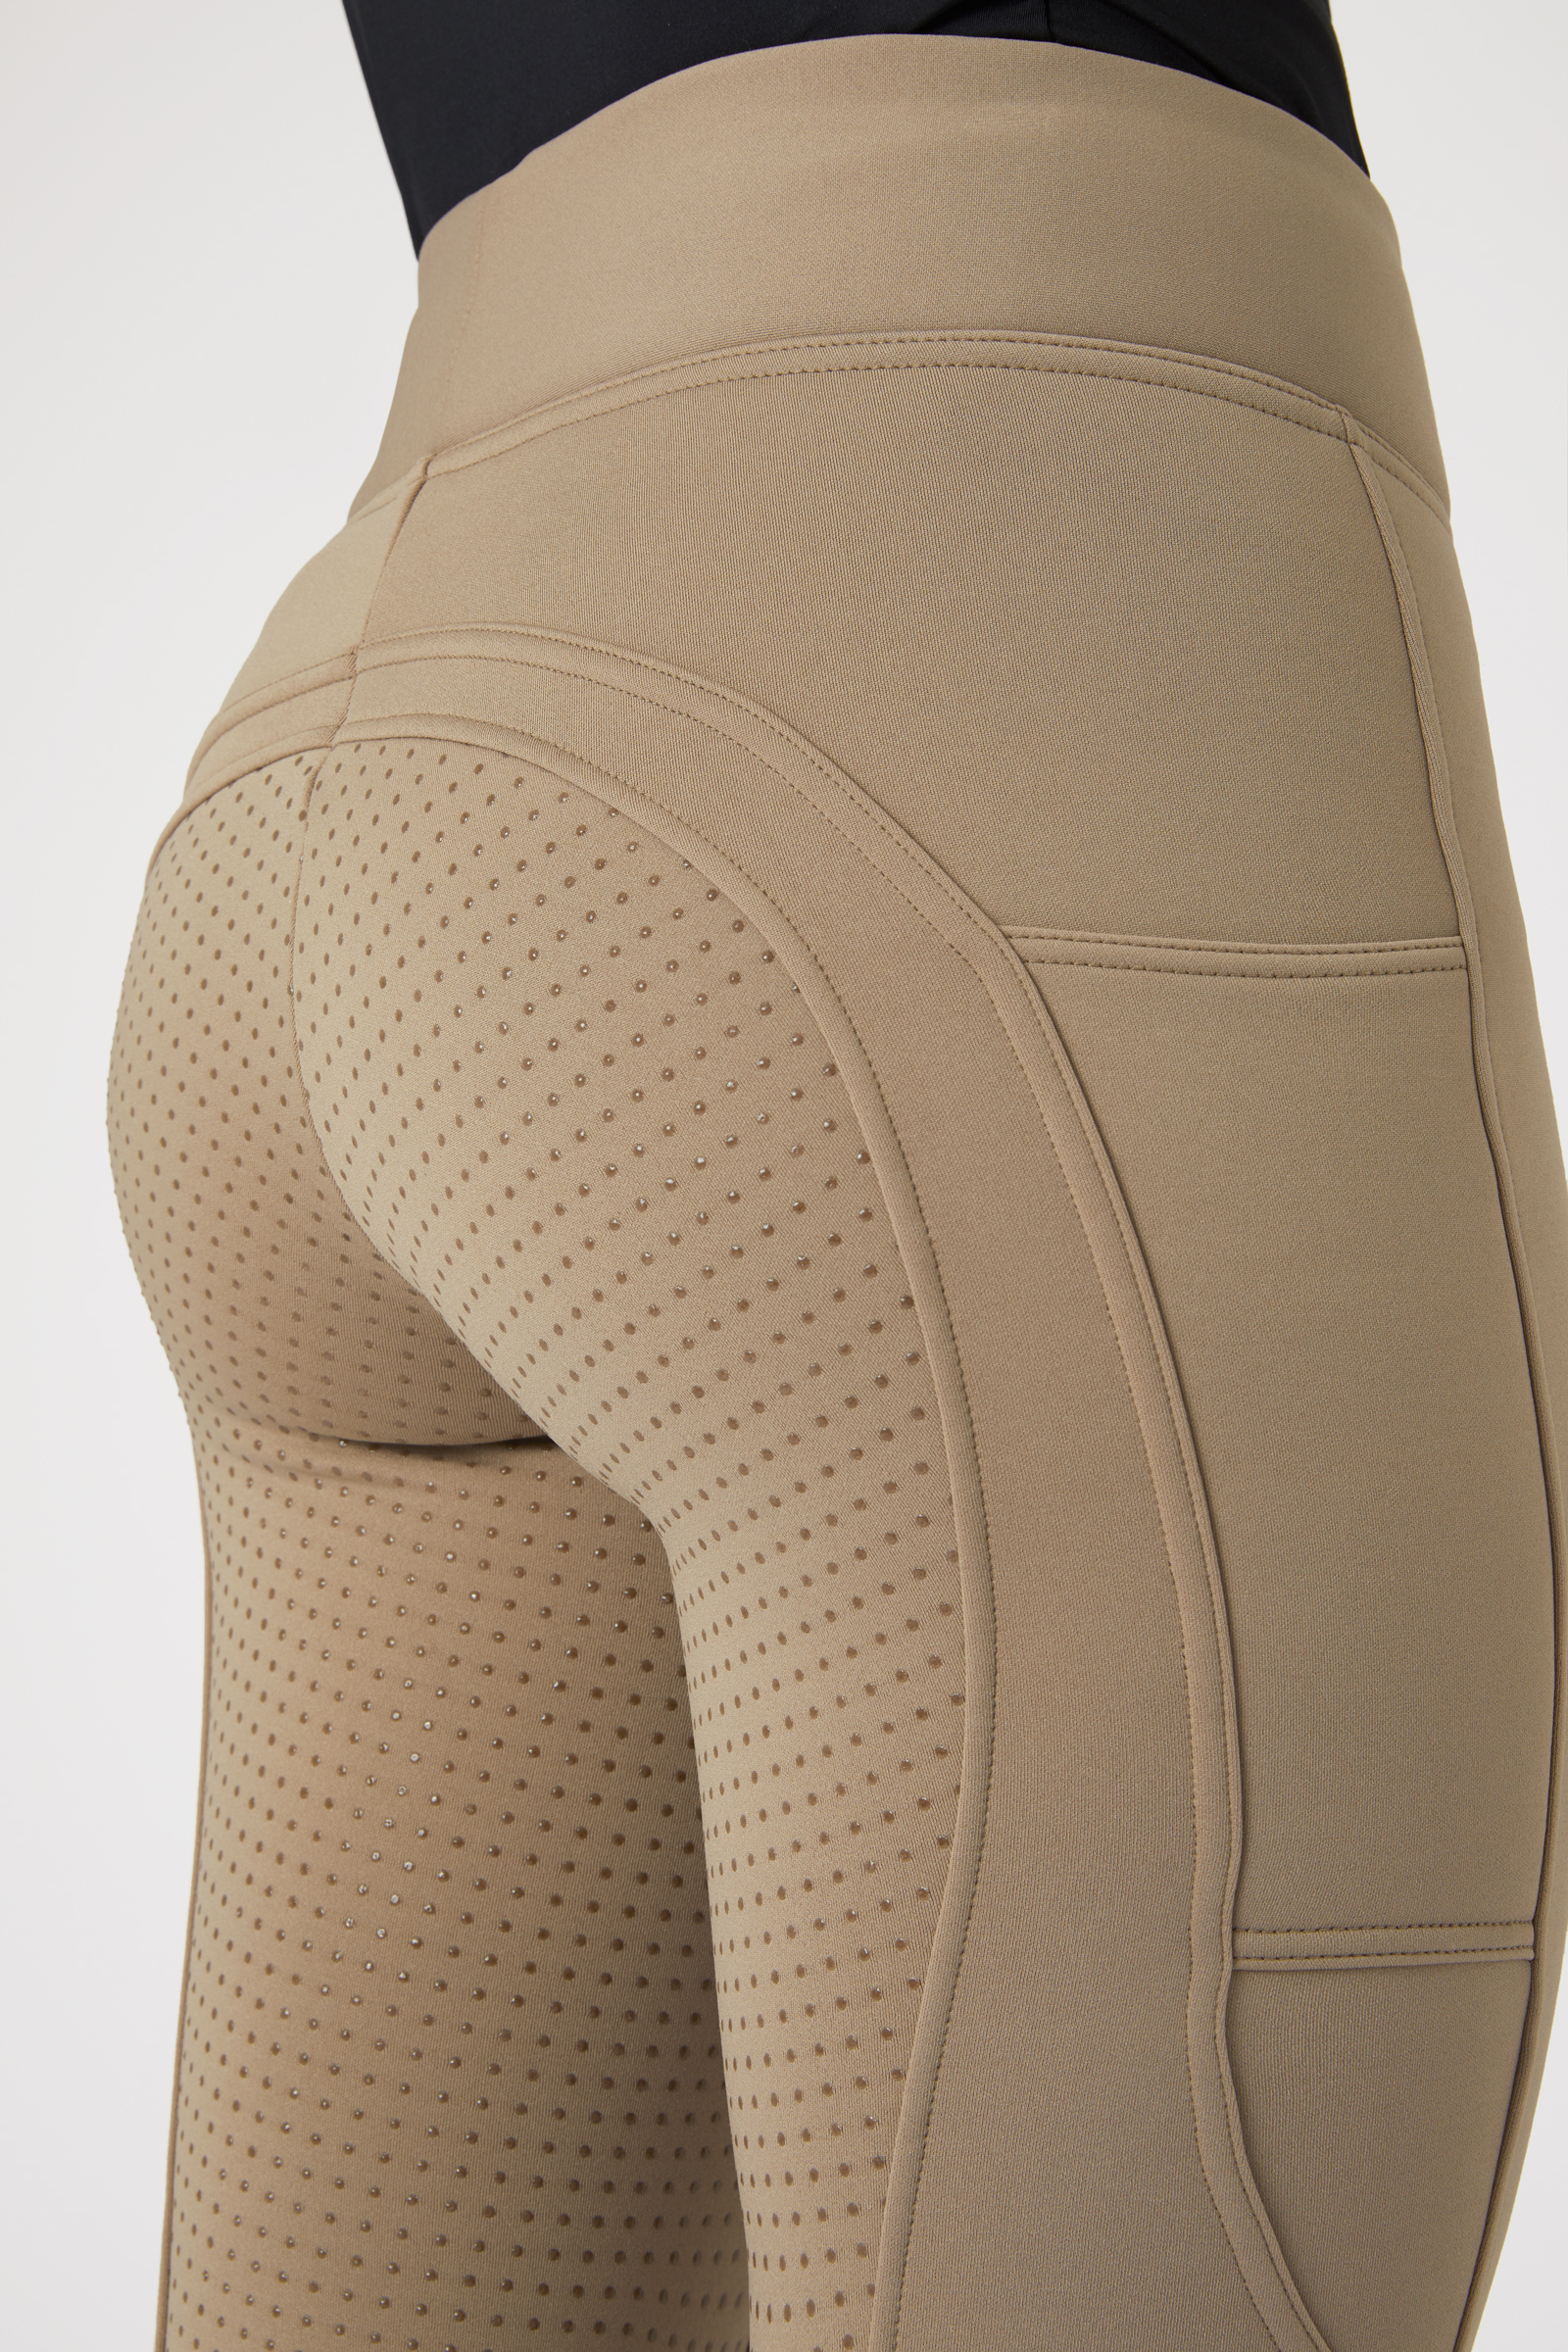 WINTER Thermal Hunter Beige Riding Leggings / Tights with Two Phone Pockets  - LuxeEquine